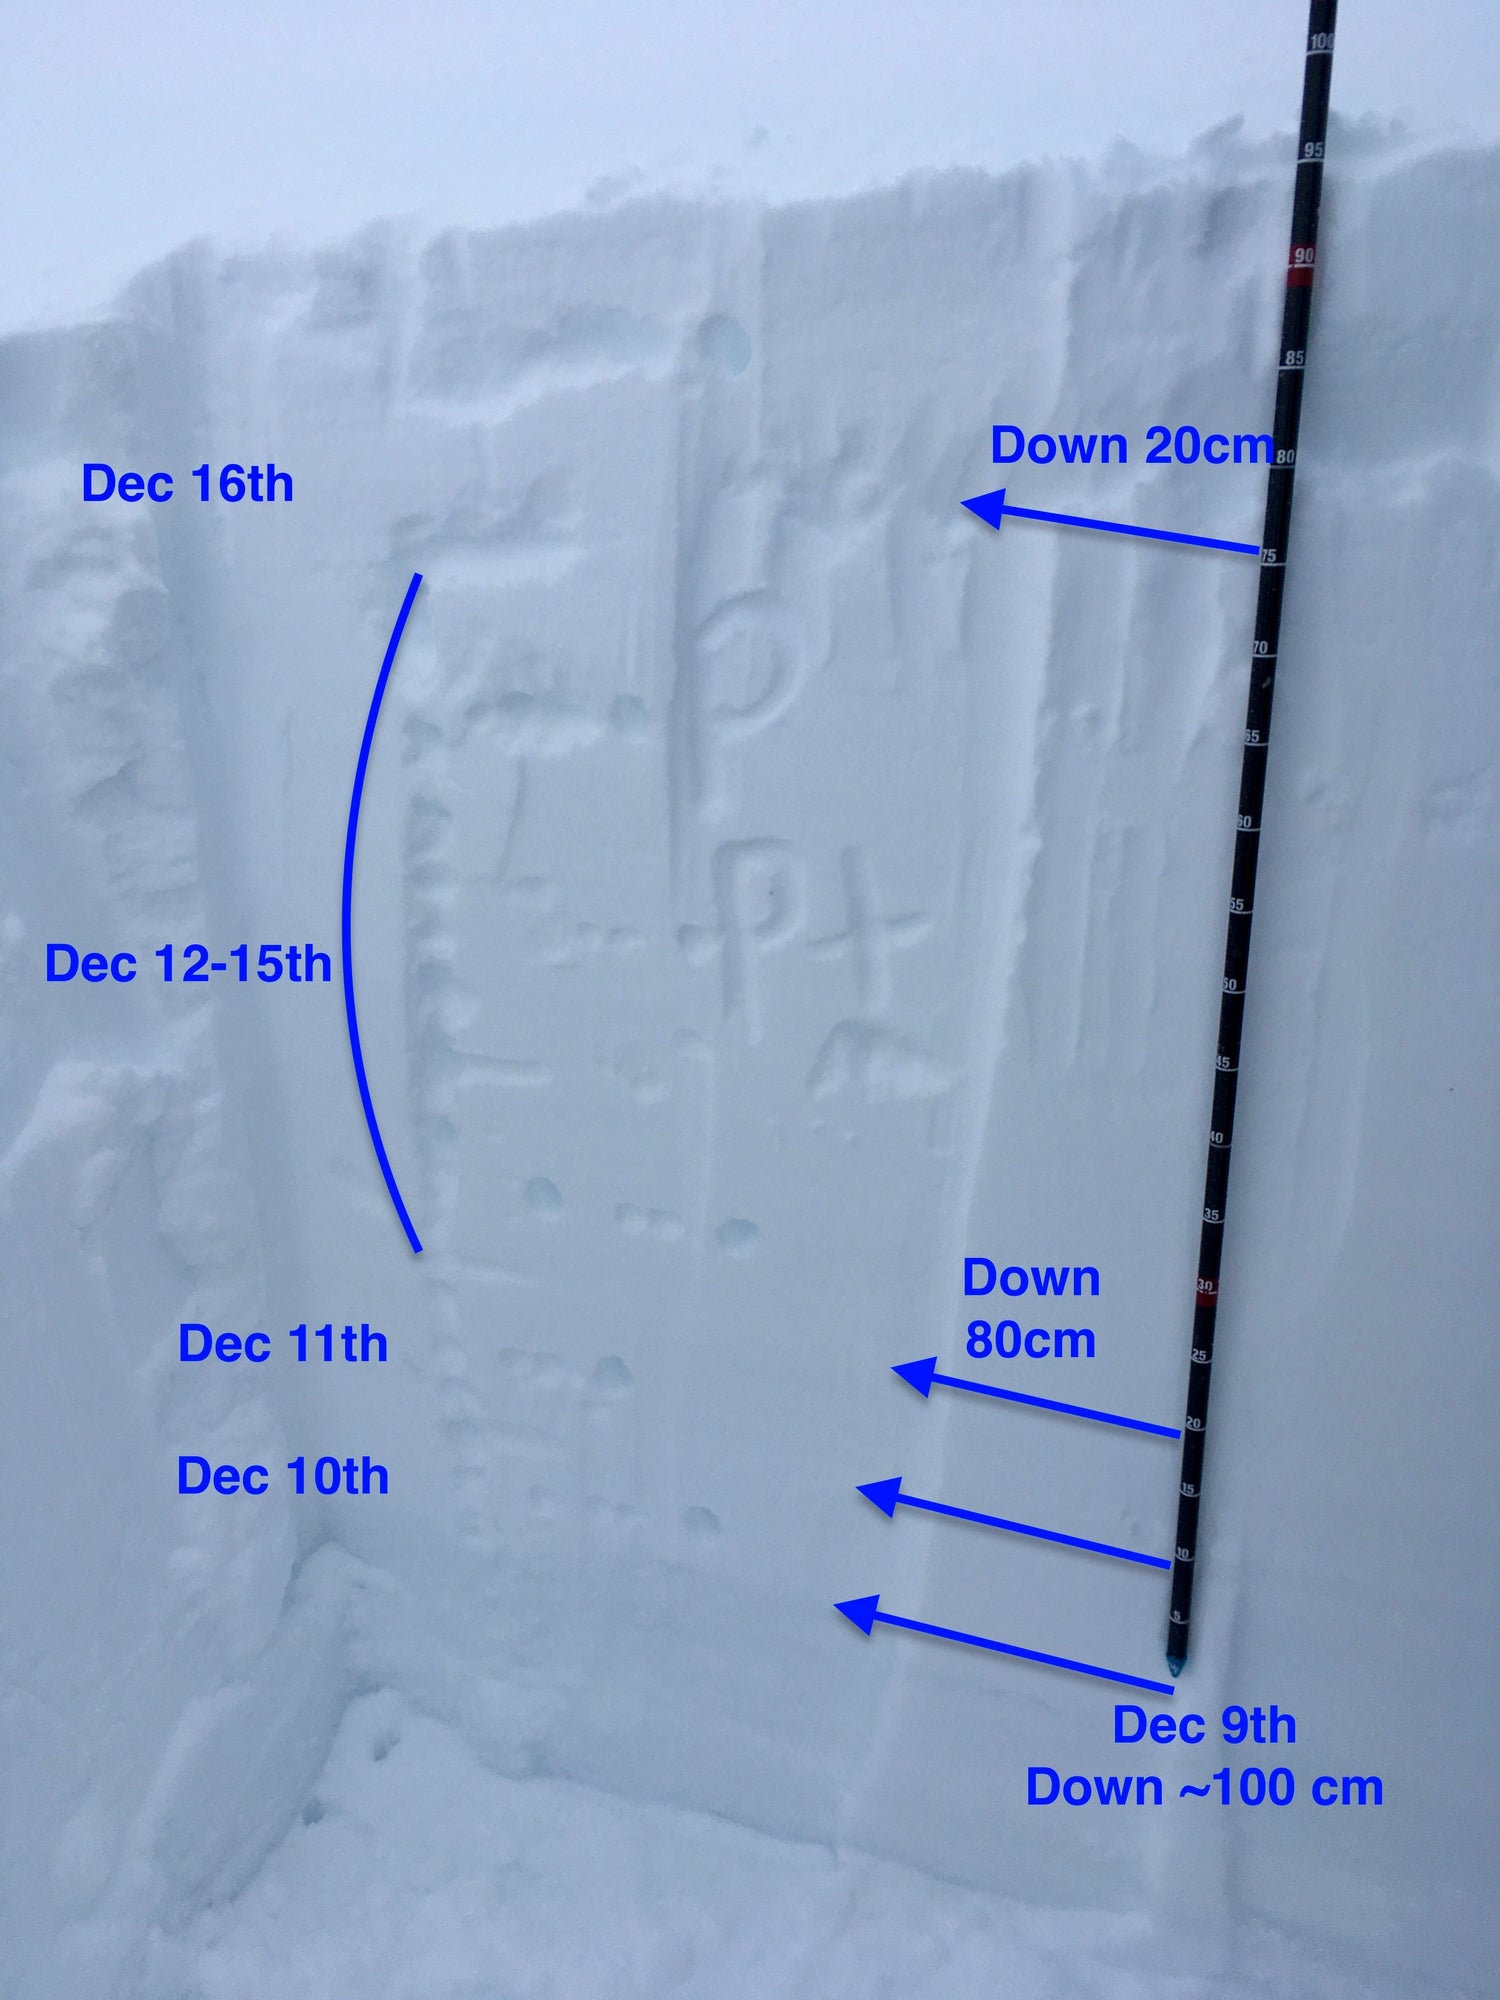 Snowpack layering can be connected to dates and weather. Layers of the snowpack have been labeled by depth and date.